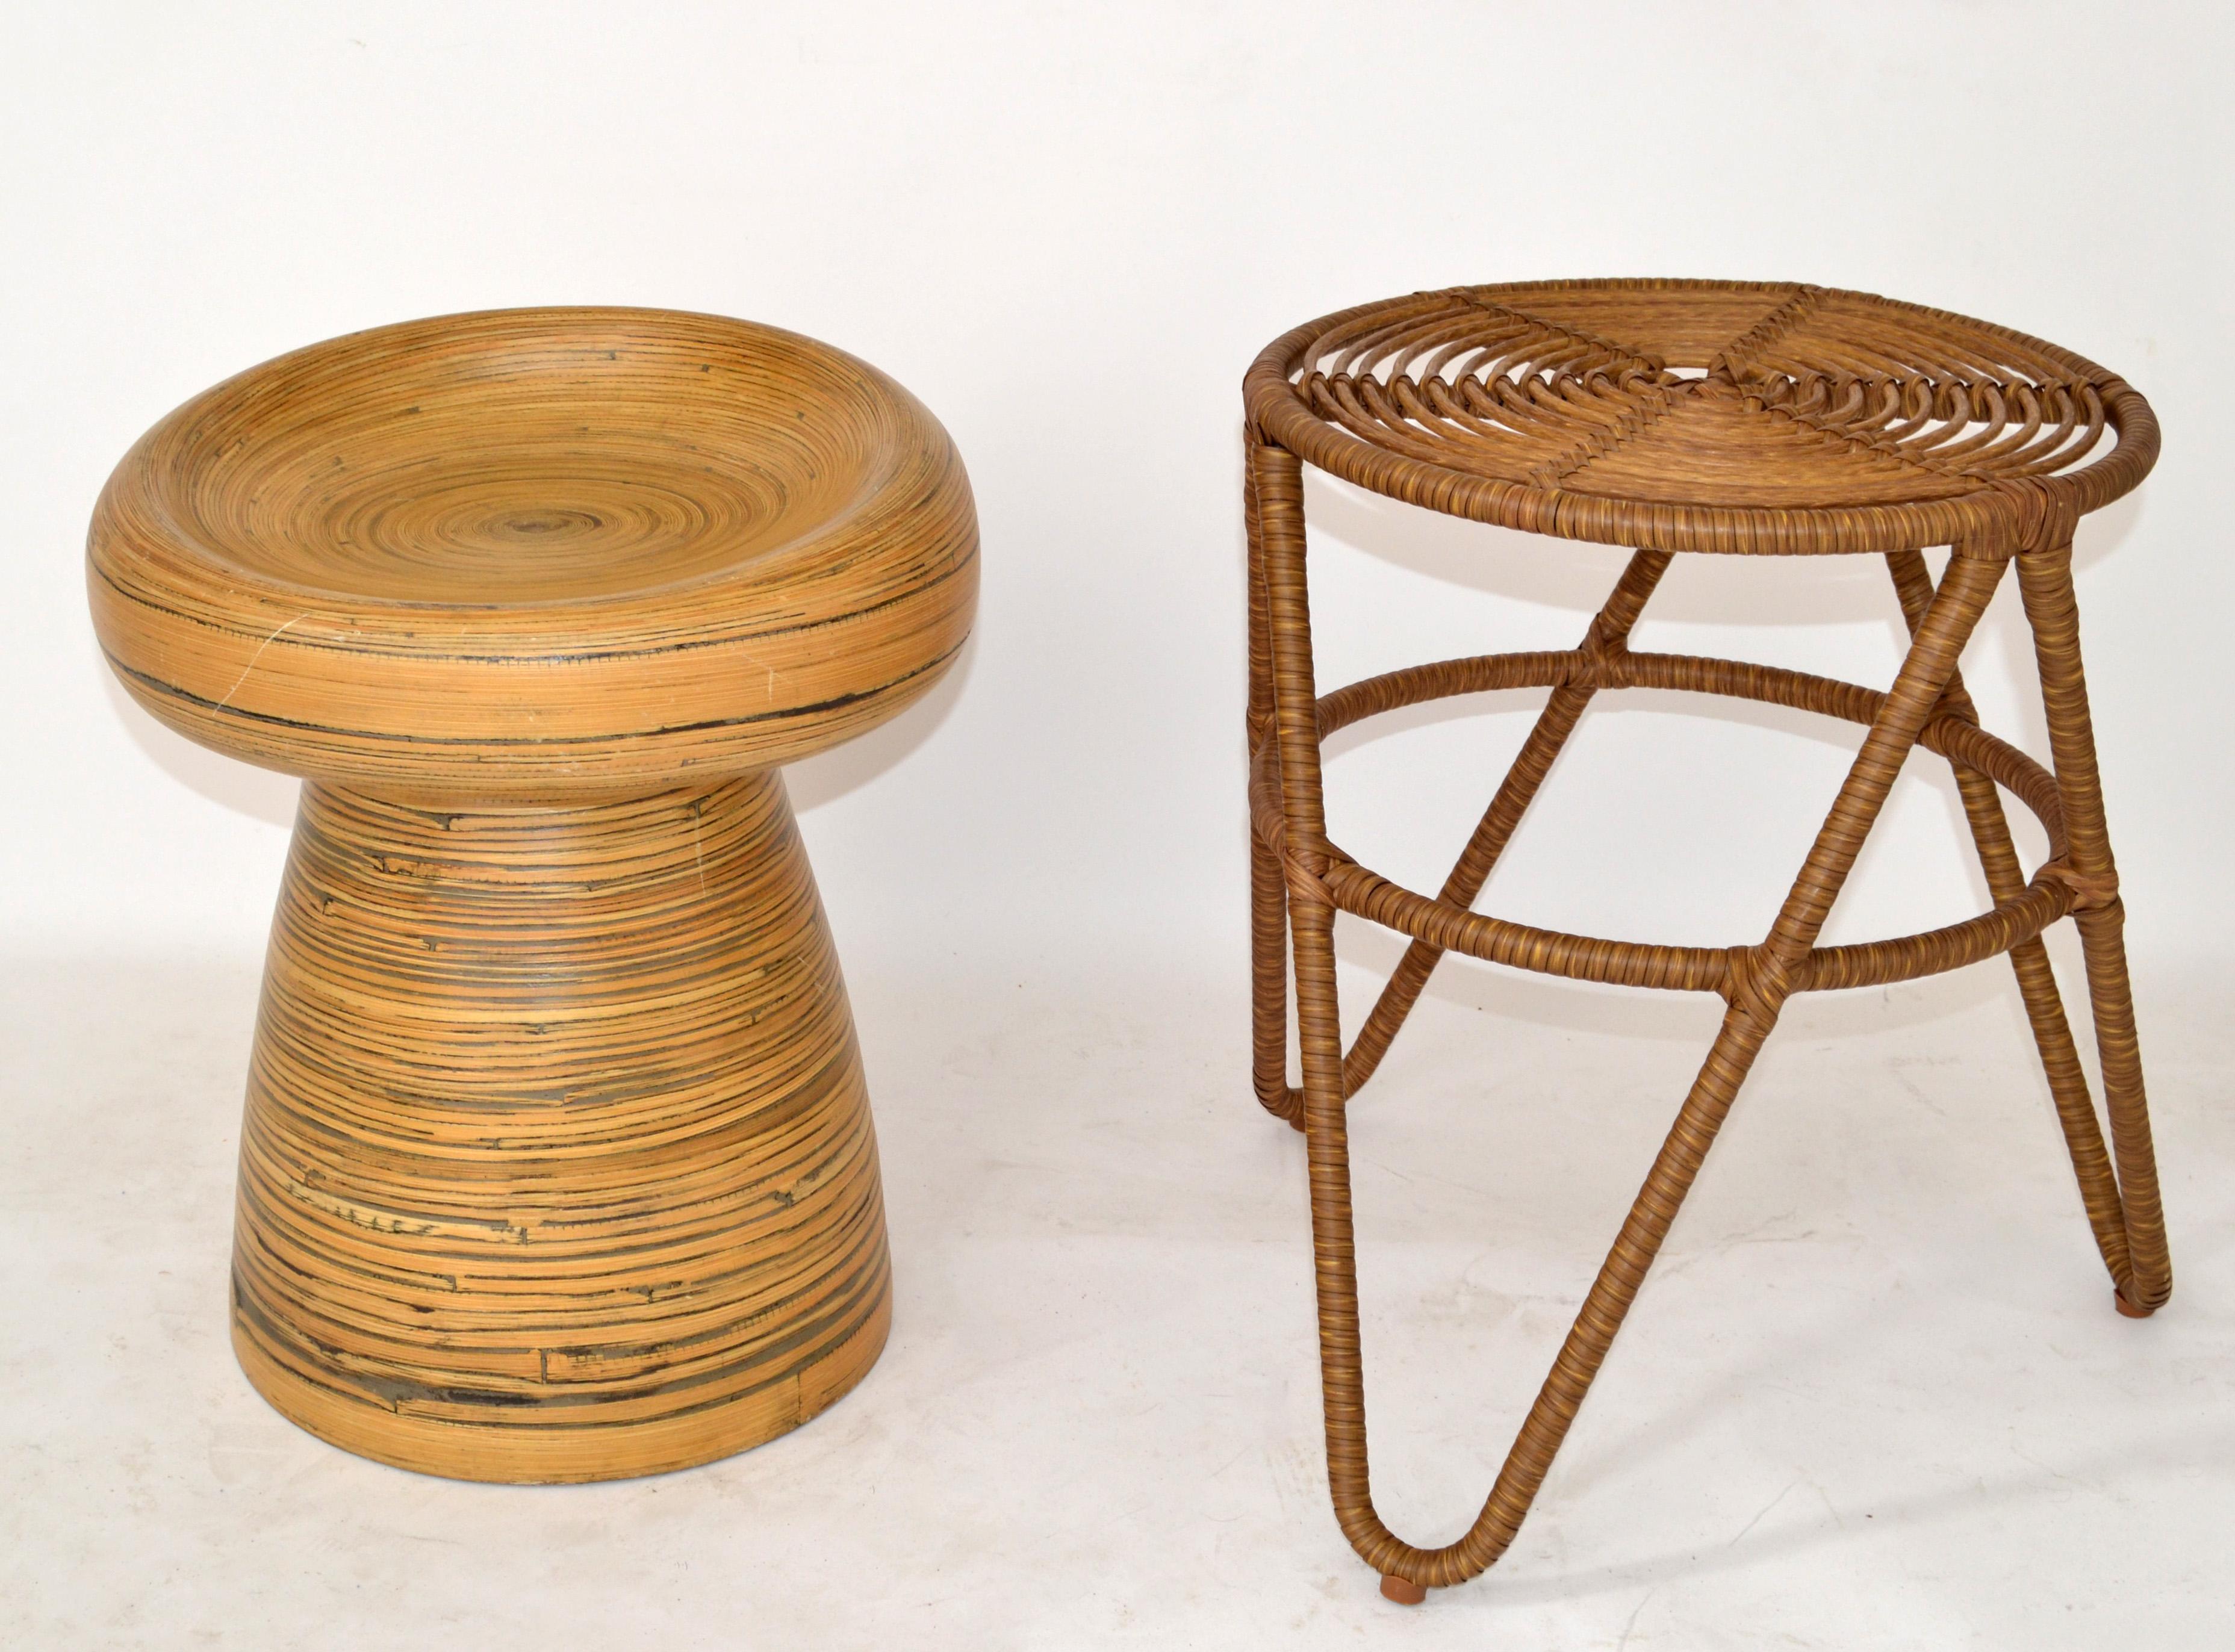 Vintage Bohemian Blonde Pressed Bamboo Mushroom Shaped Stool Mid-Century Modern In Good Condition For Sale In Miami, FL